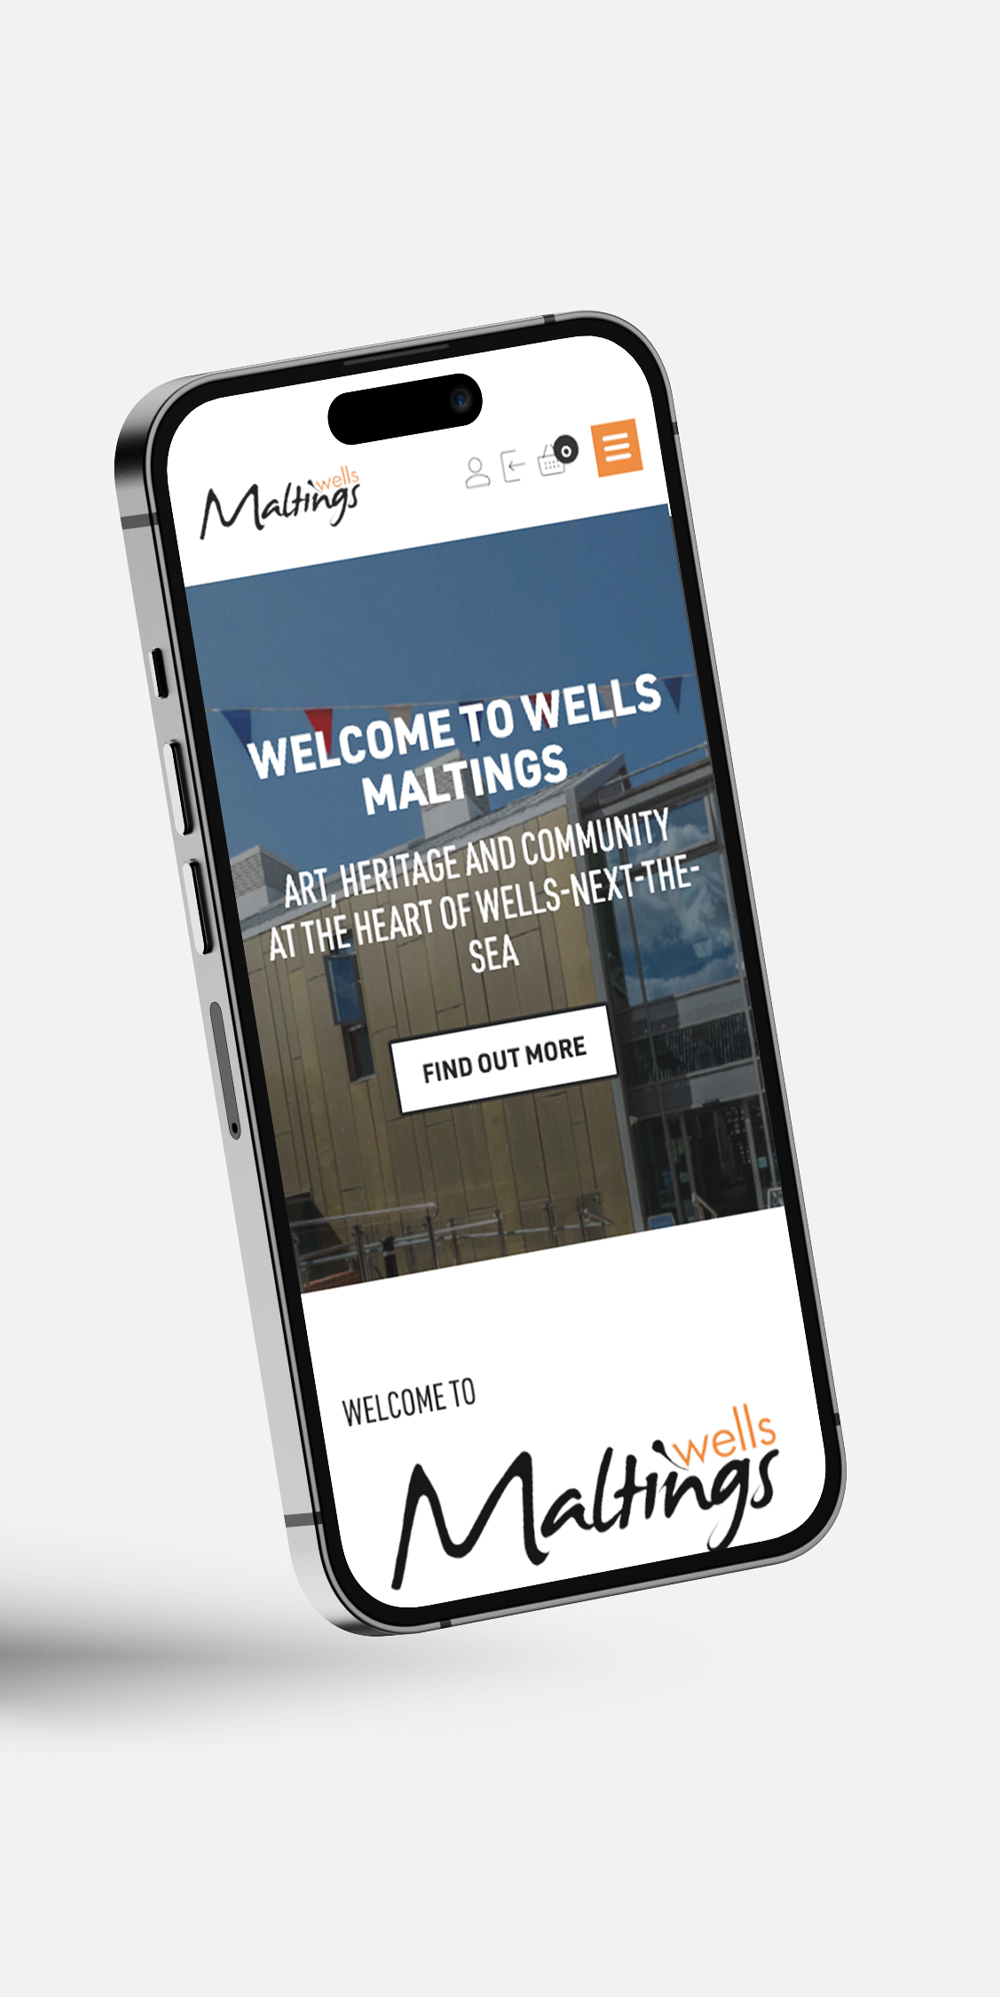 Wells Maltings welcome page shown on a phone screen